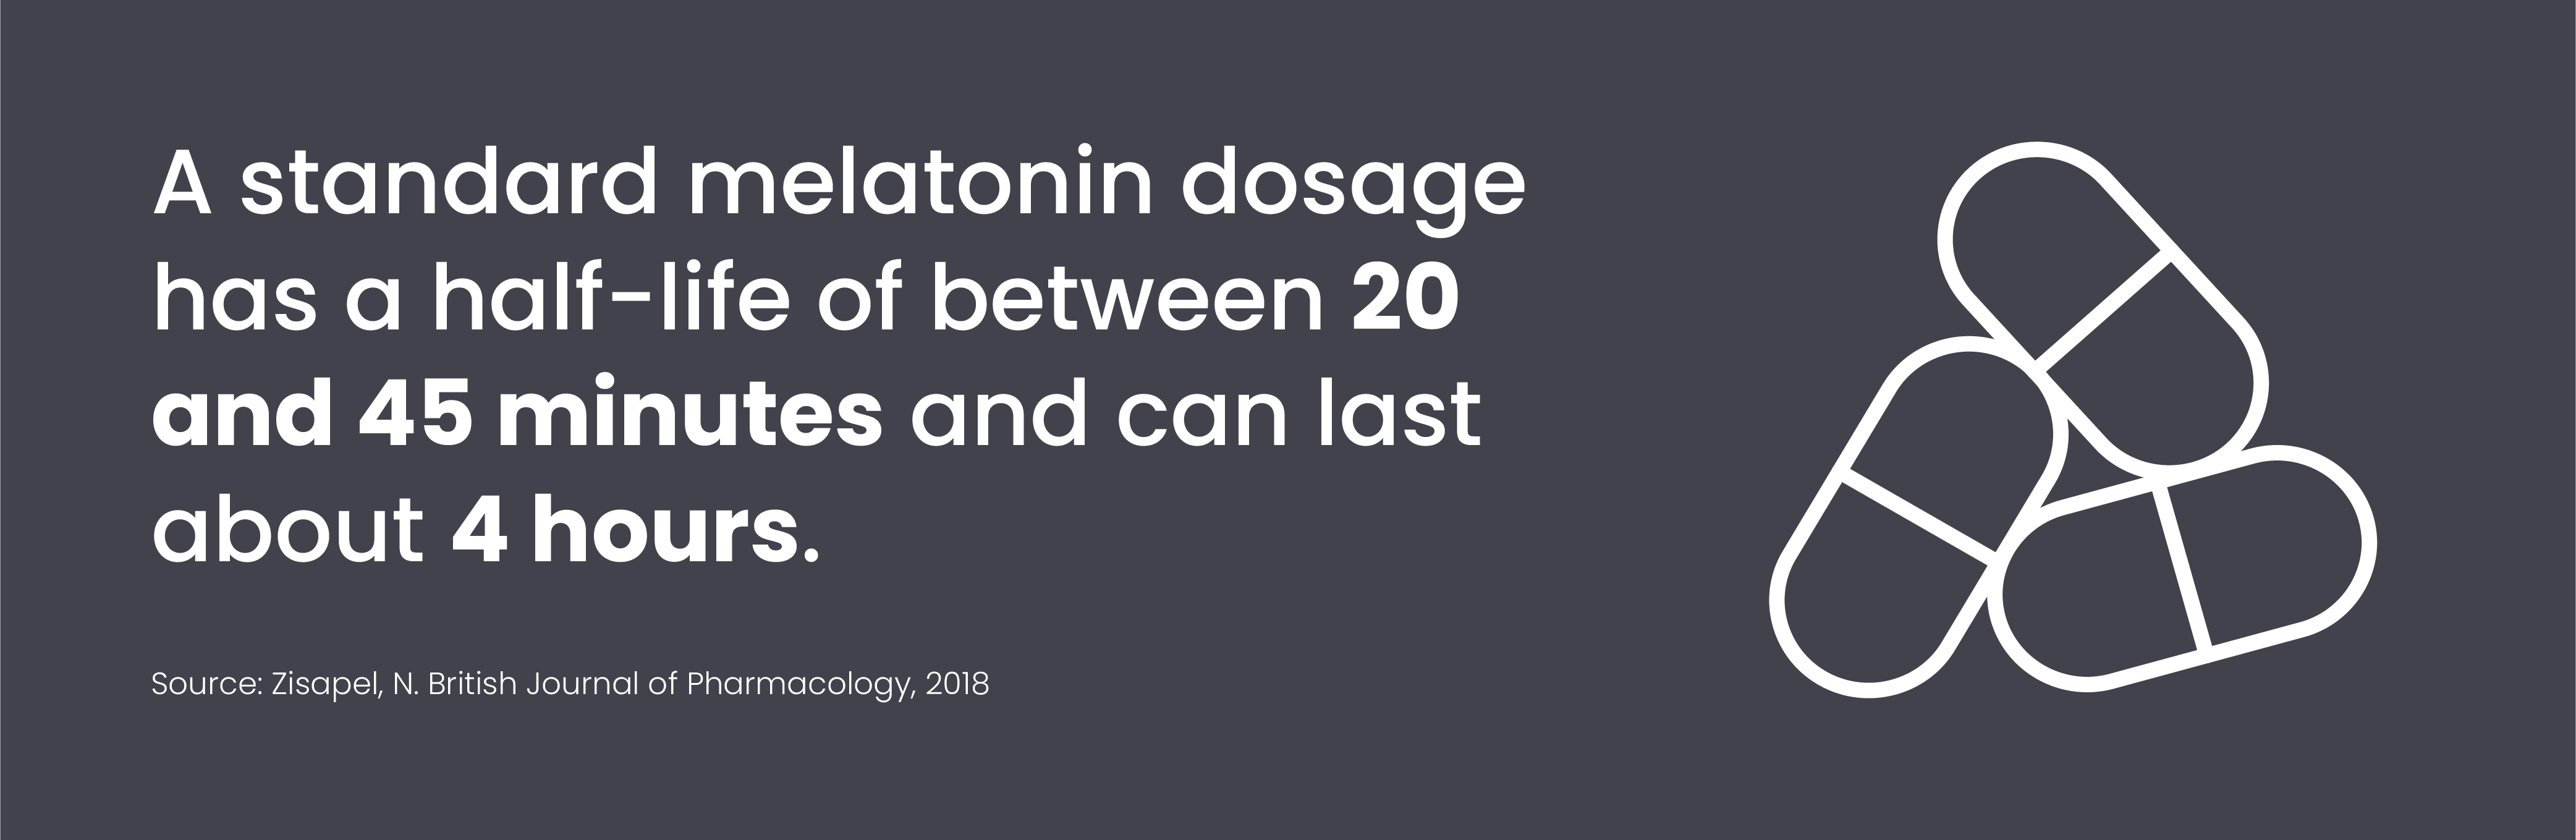 A standard melatonin dosage has a half-life of between 20 and 45 minutes and can last about 4 hours.